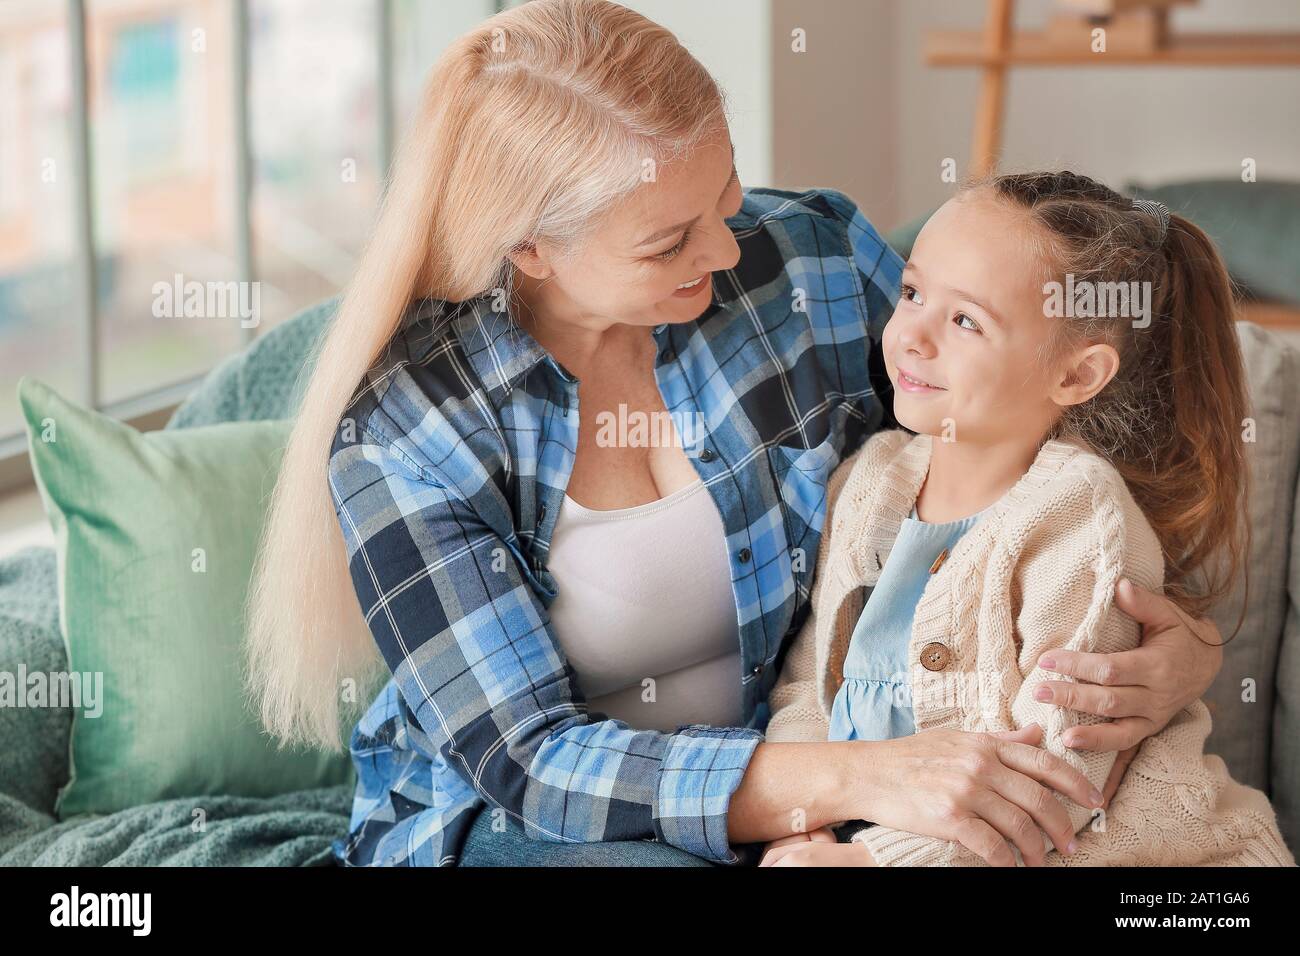 Little girl and grandmother spending time together at home Stock Photo